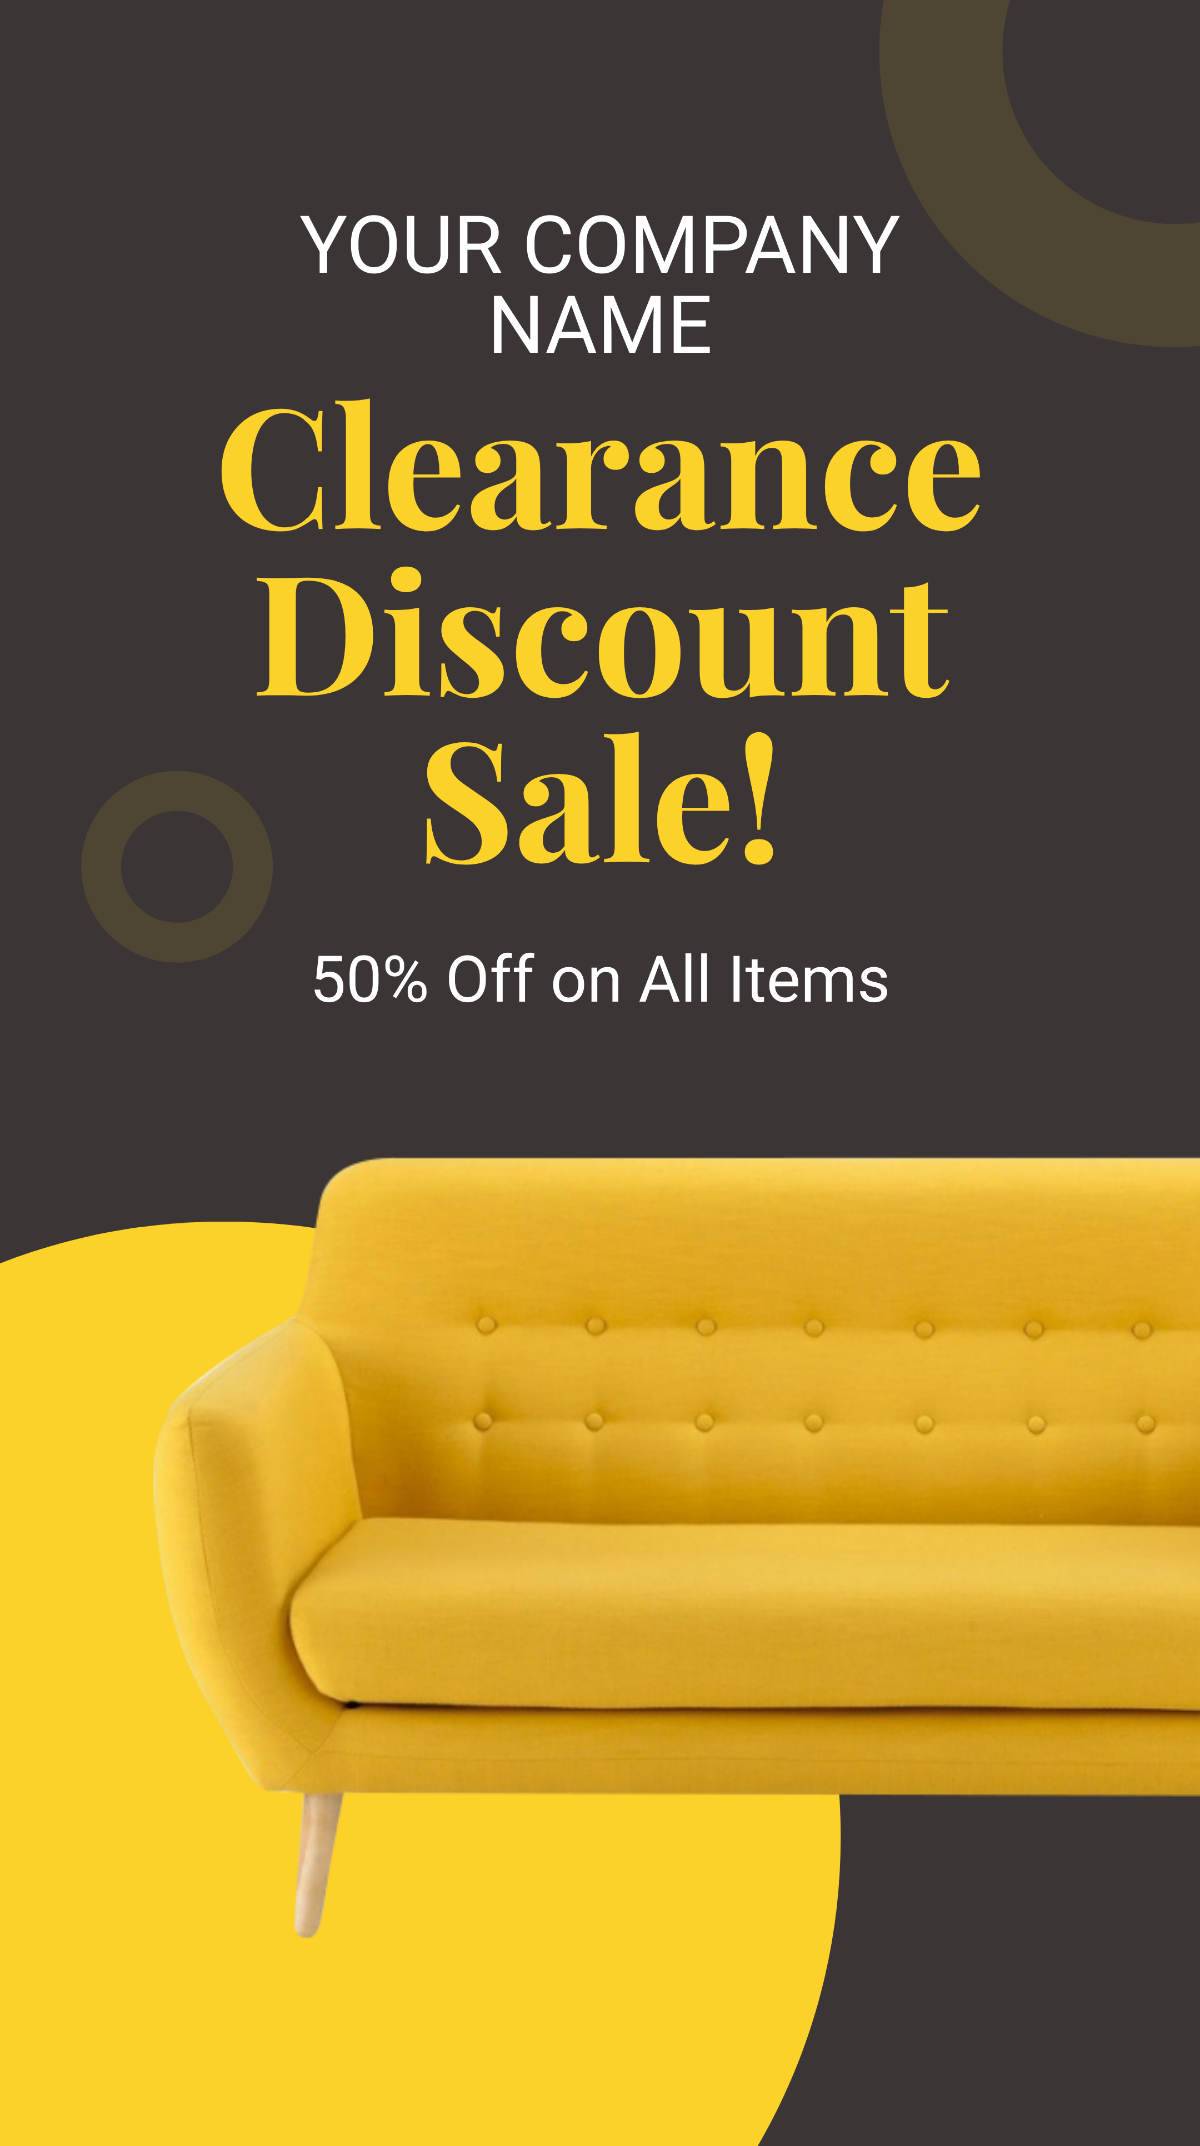 Clearance Discount Sale Instagram Story